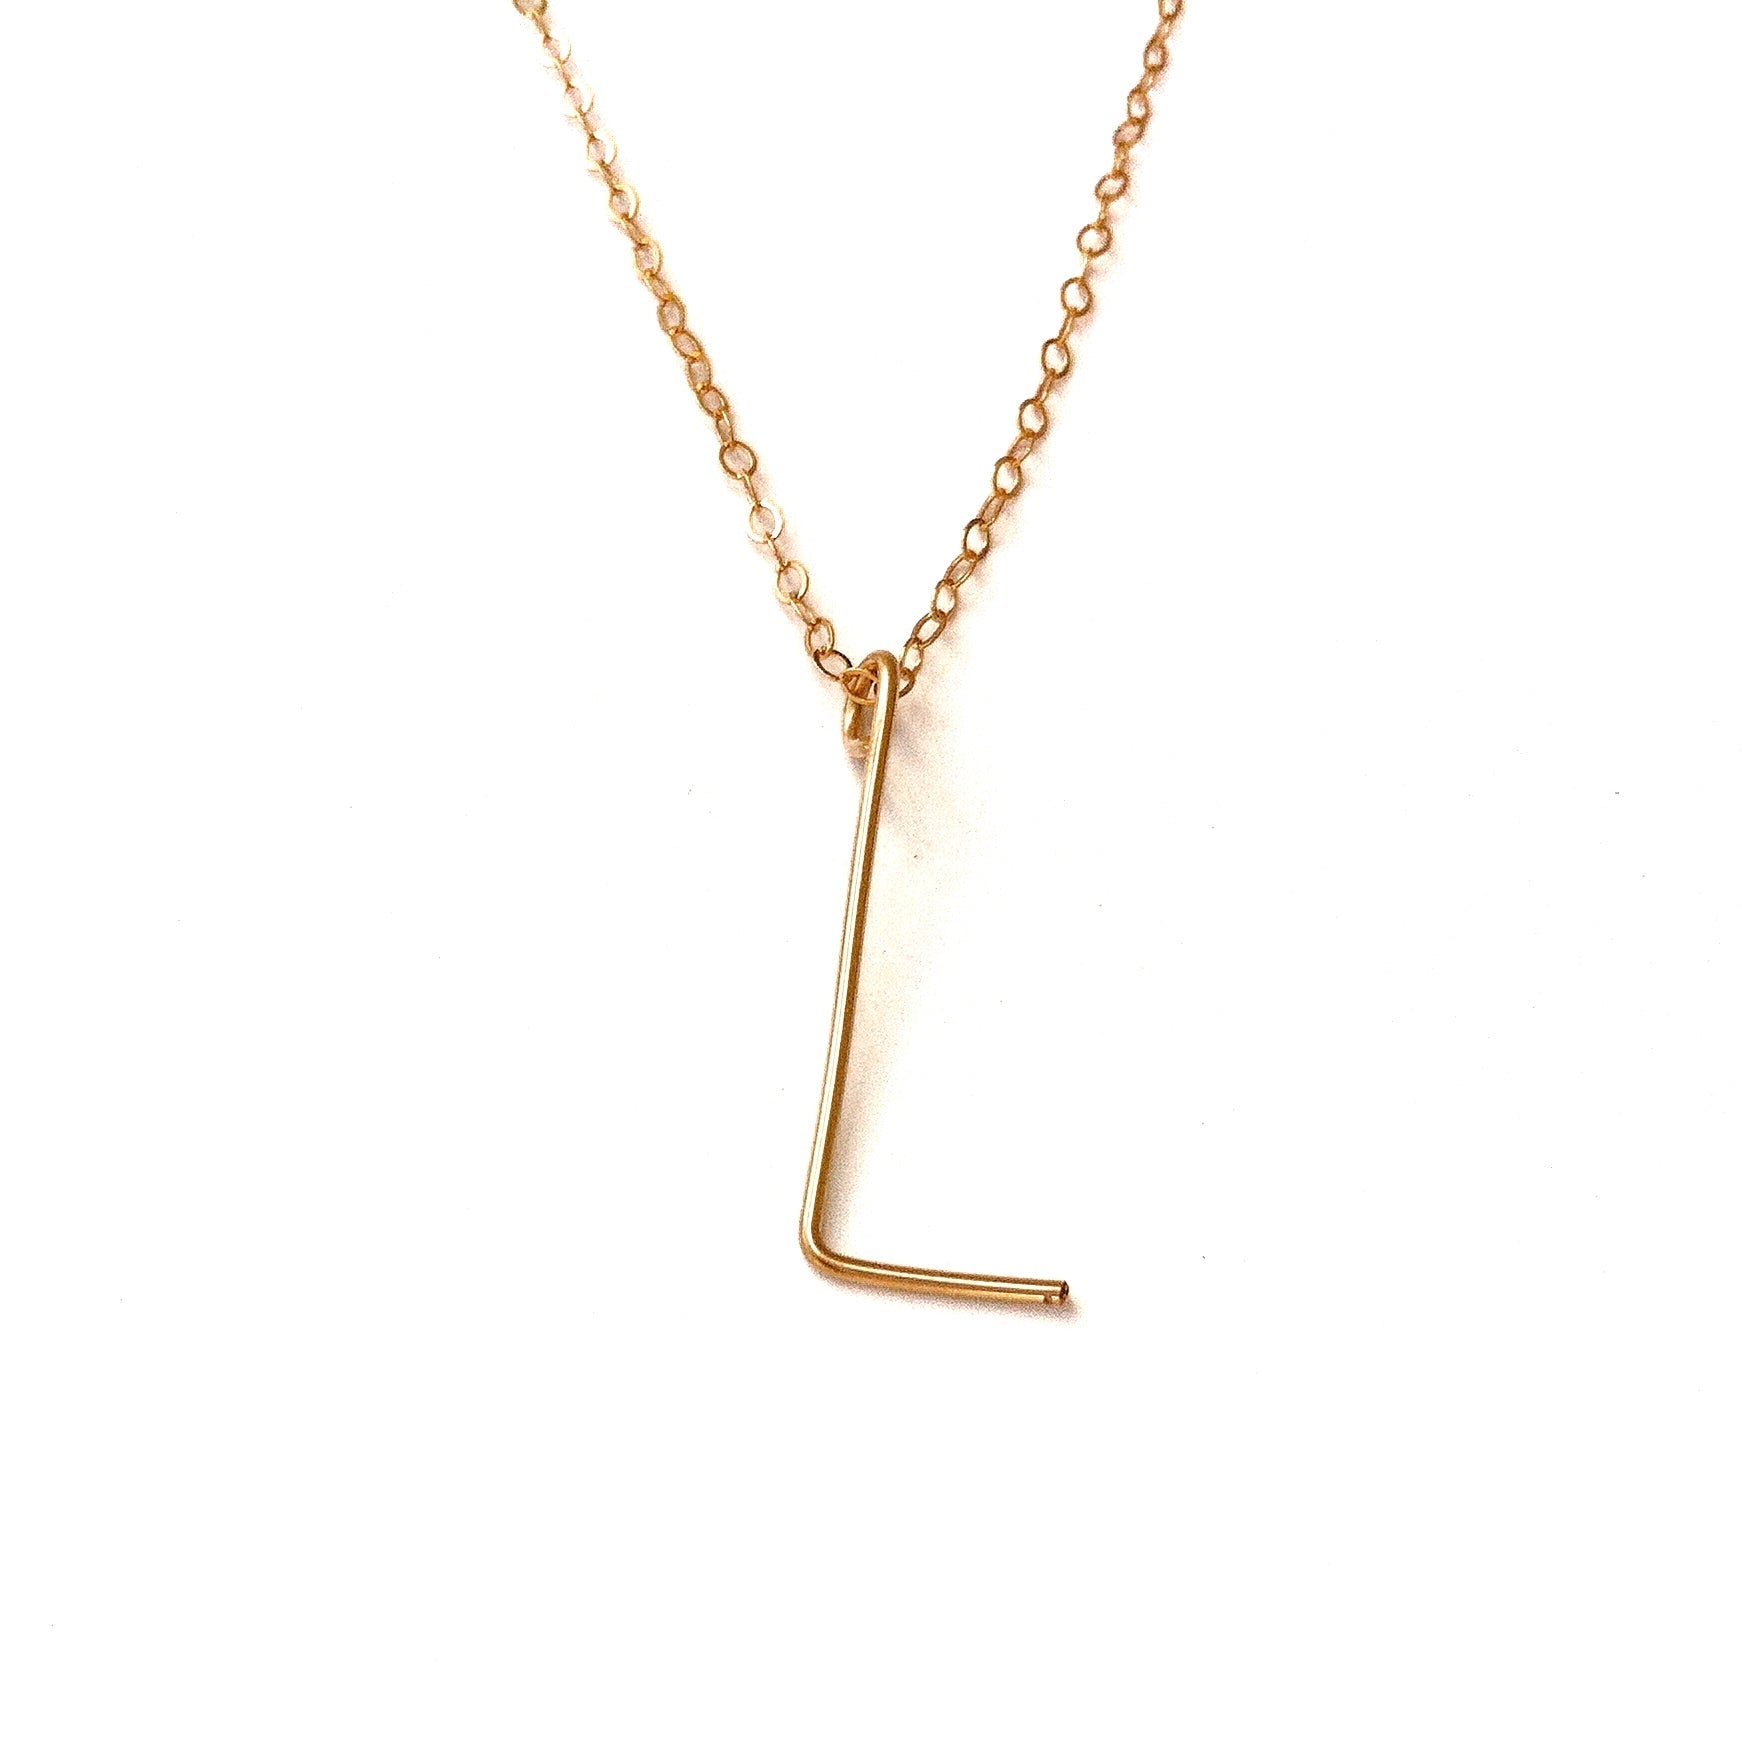 Handmade Initial Necklace Robyn Canady L 14K Gold Filled 